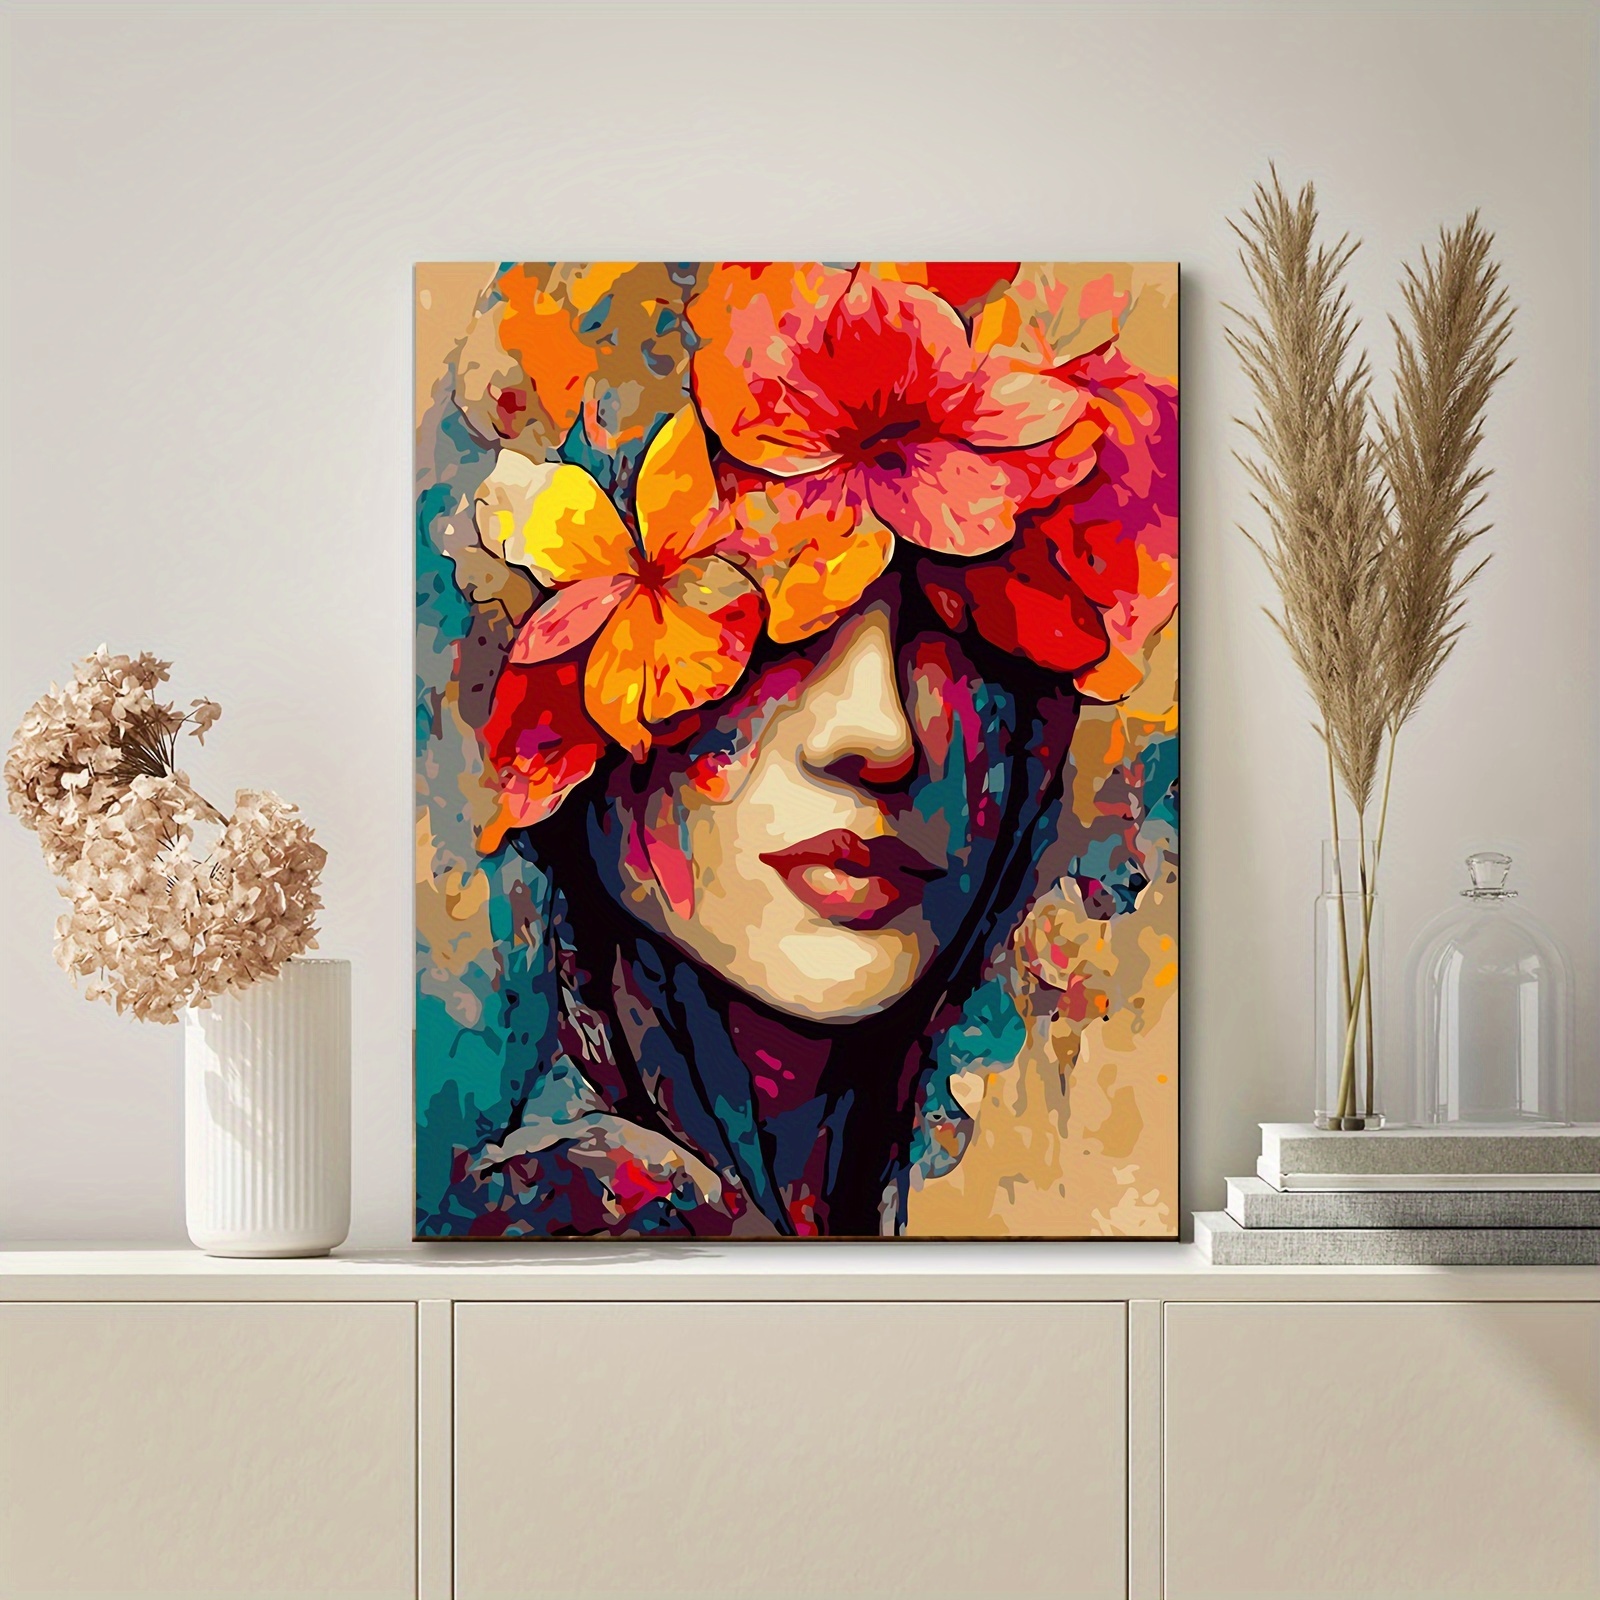 PAINT by NUMBERS Kit for Adults Easy DIY Art , Beautiful Woman Abstract  Portrait, Adults Acrylic Painting Set Home Wall Decor Gift 